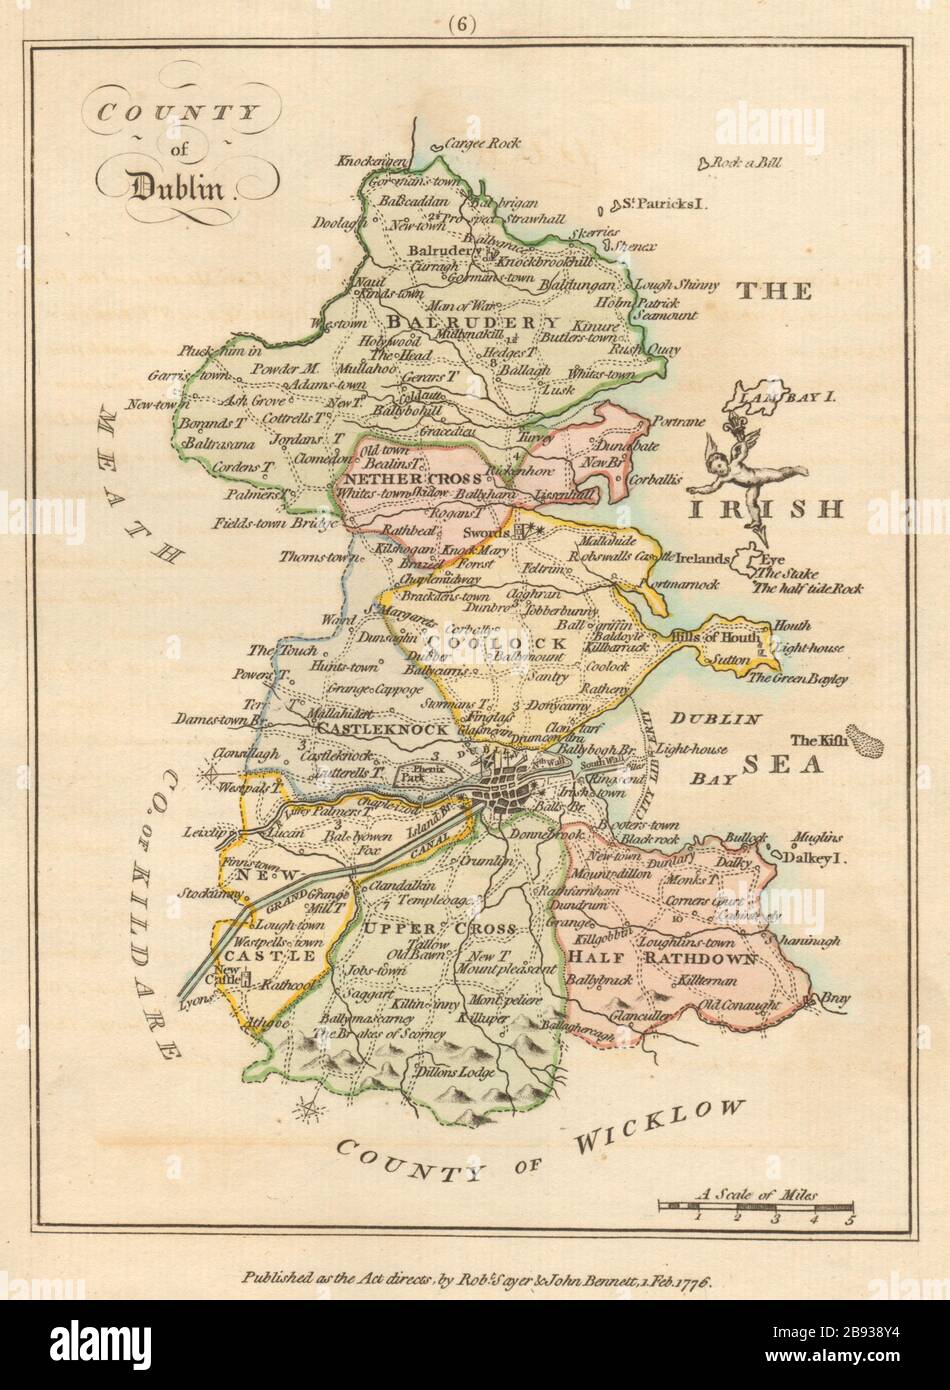 County of Dublin, Leinster. Antique copperplate map by Scalé / Sayer 1776 Stock Photo